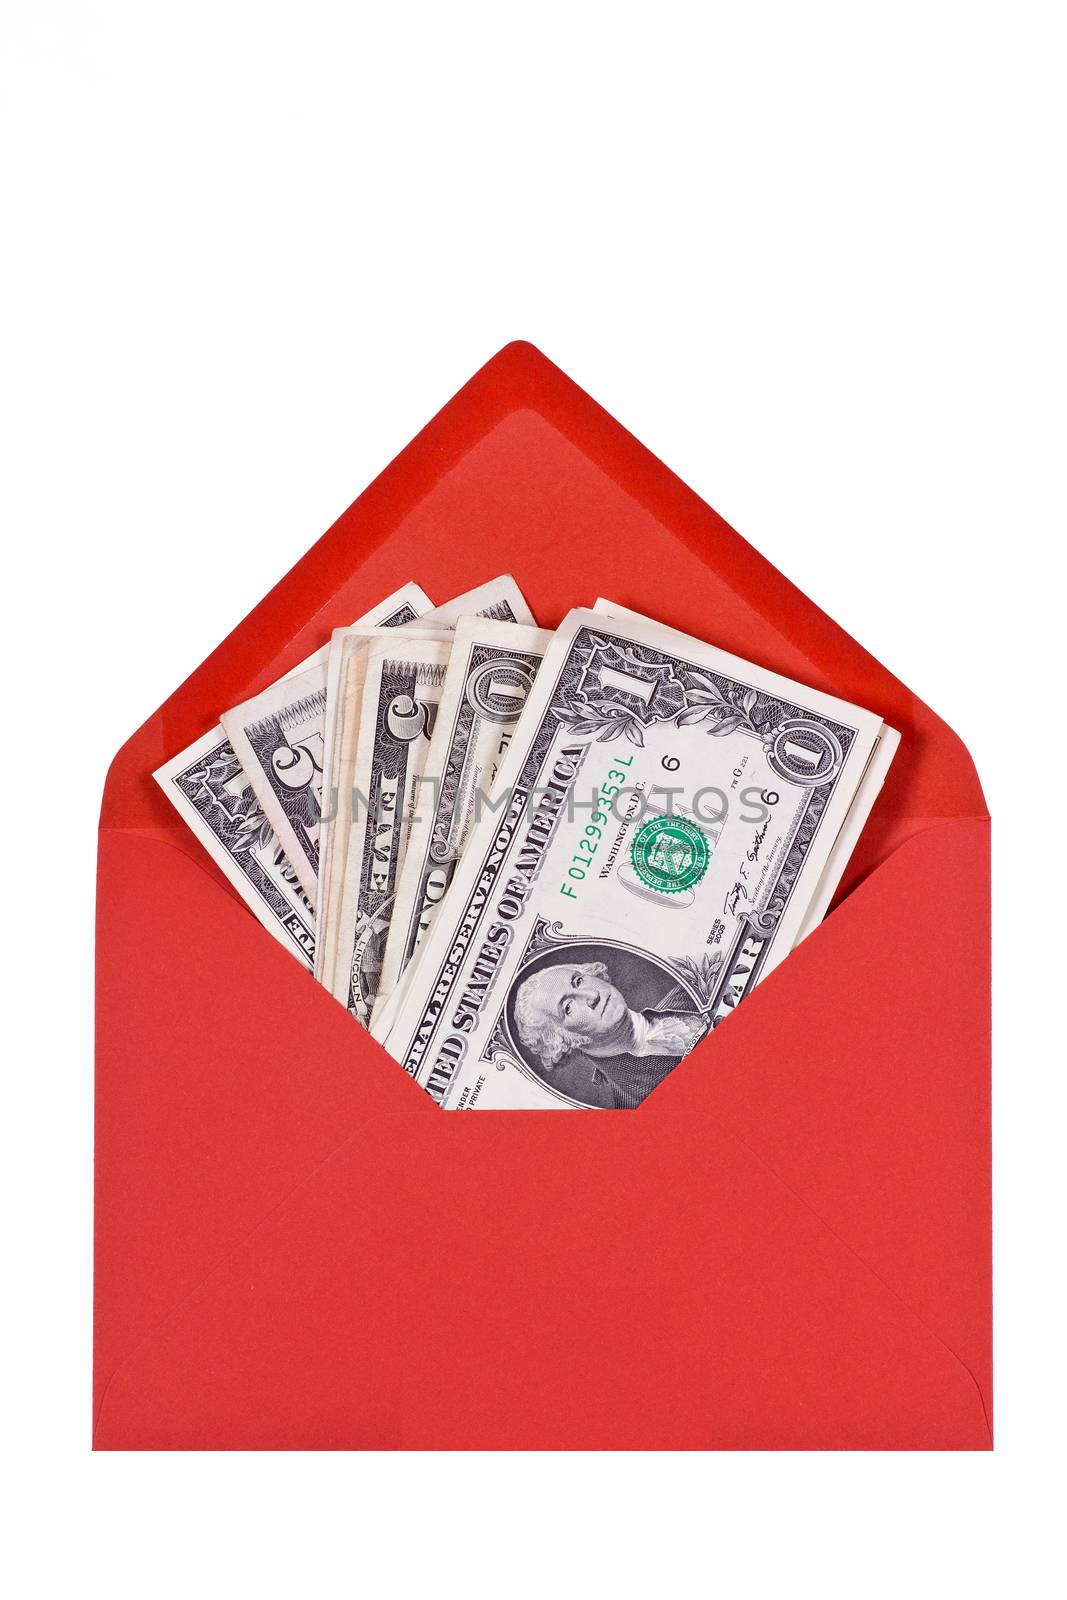 red envelope with dollar notes